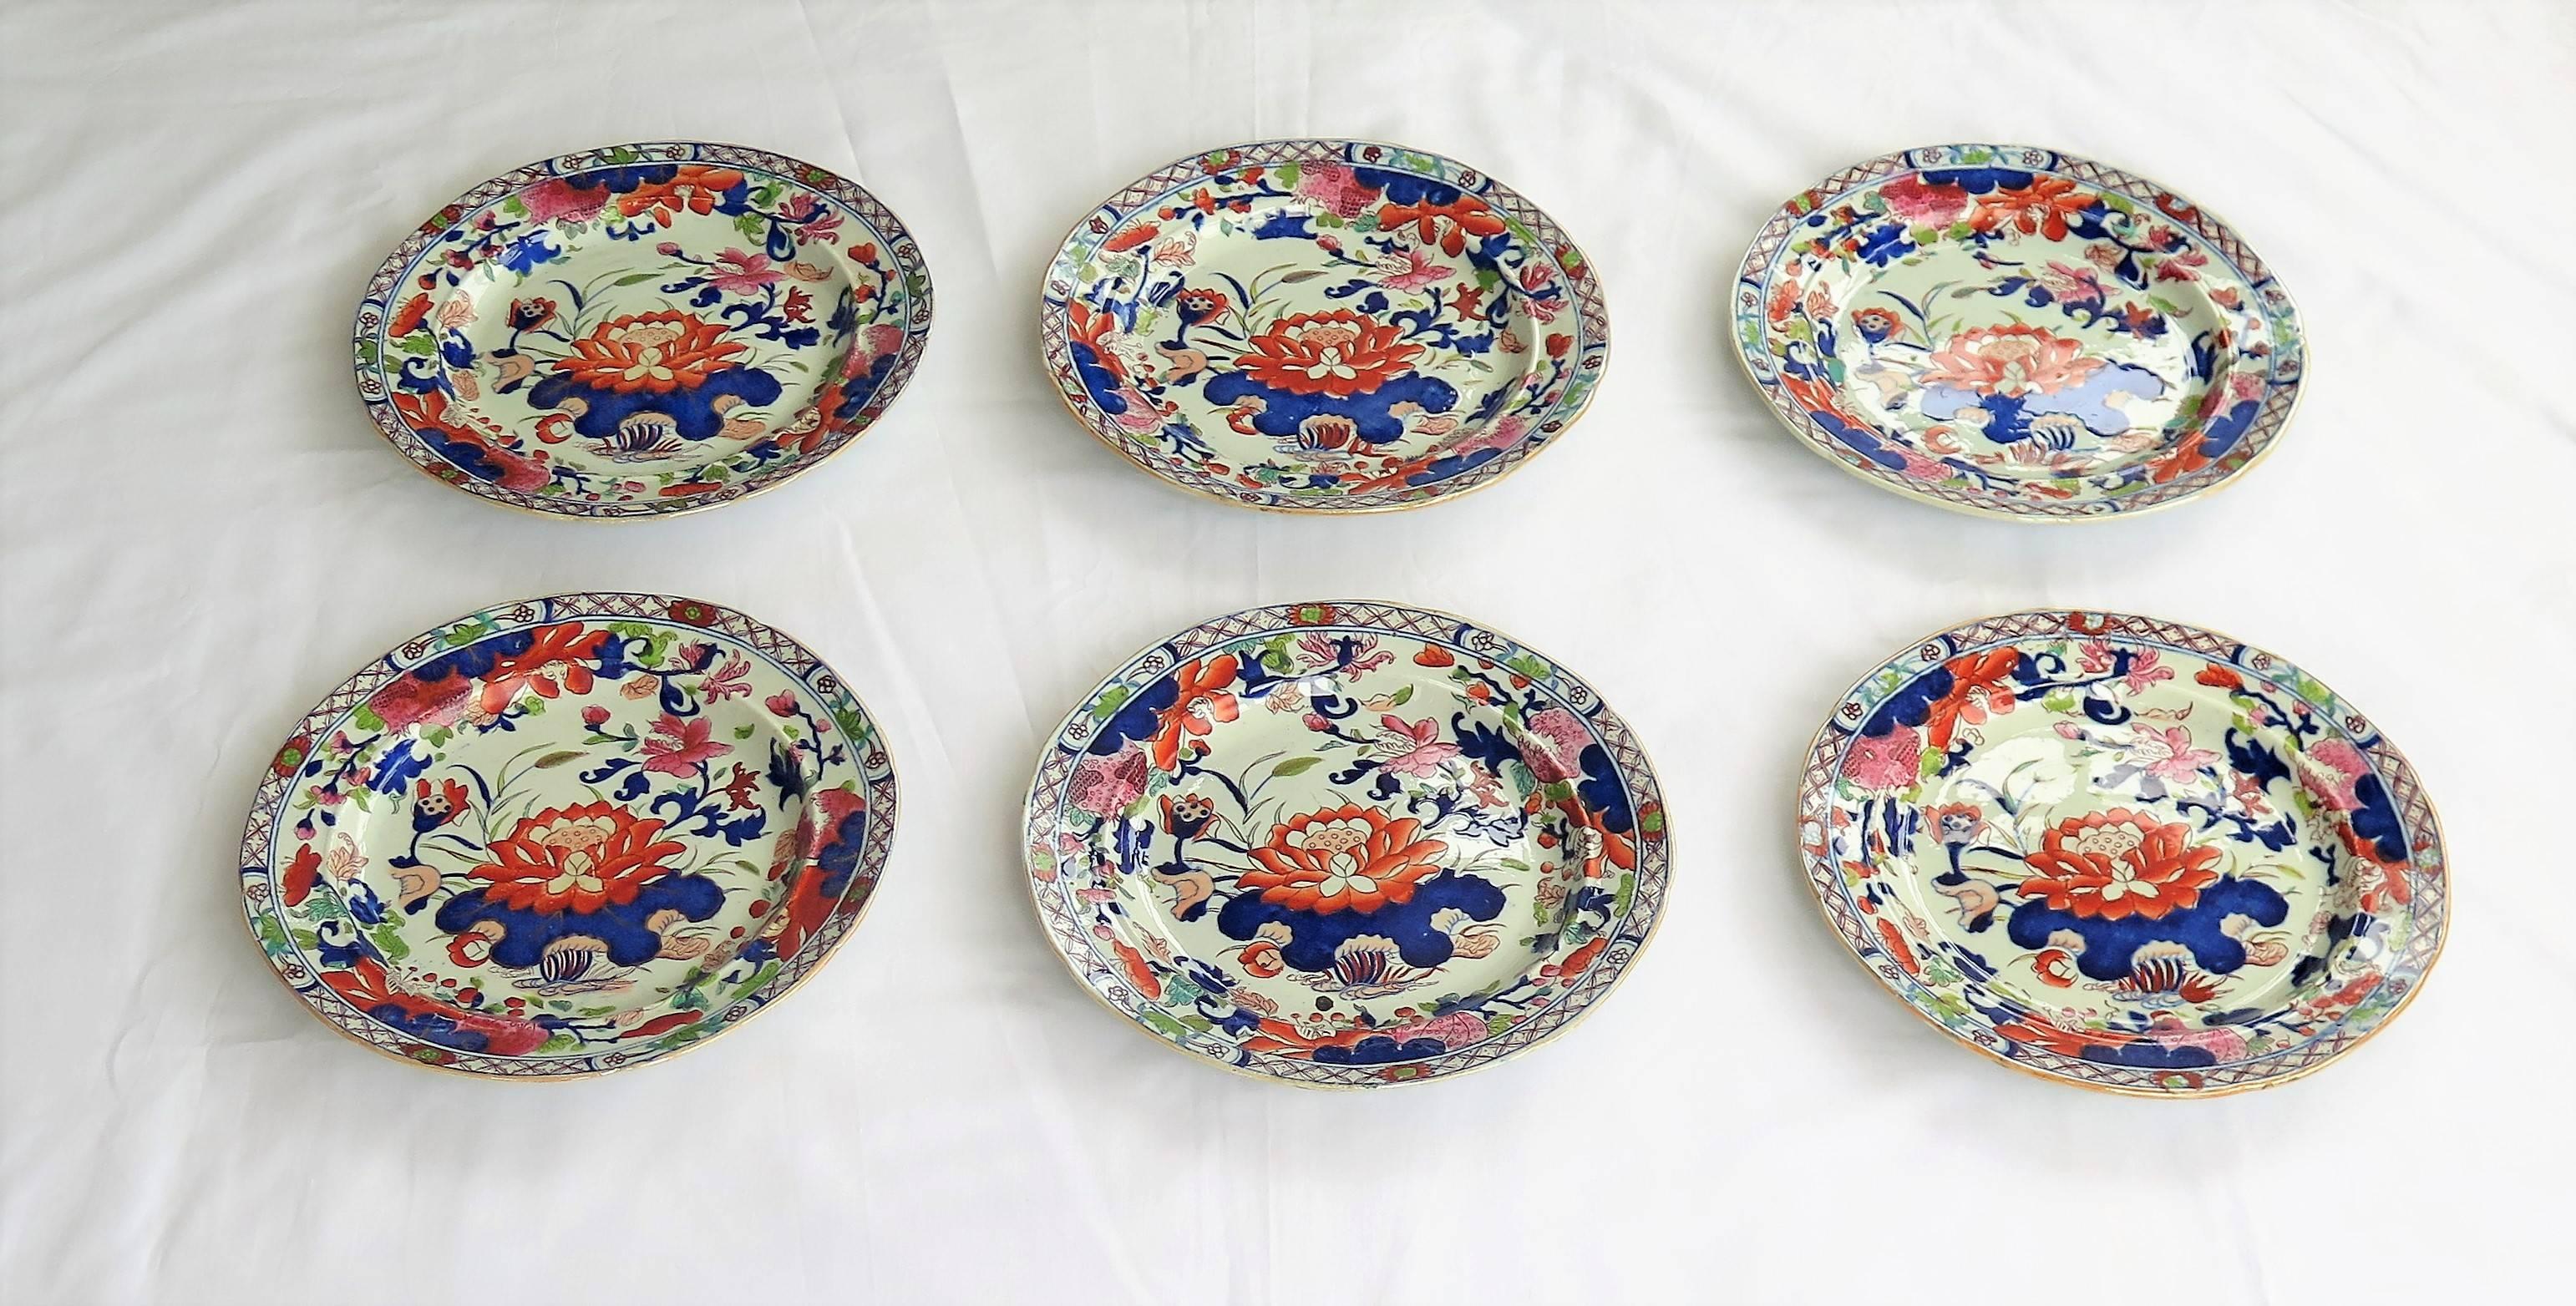 This is a rare and beautiful set of six Masons ironstone dinner plates, all dating to the earliest period between 1813 and 1820. 

All the plates are hand-painted in one of the earliest, most sought after and colorful patterns that Mason's have